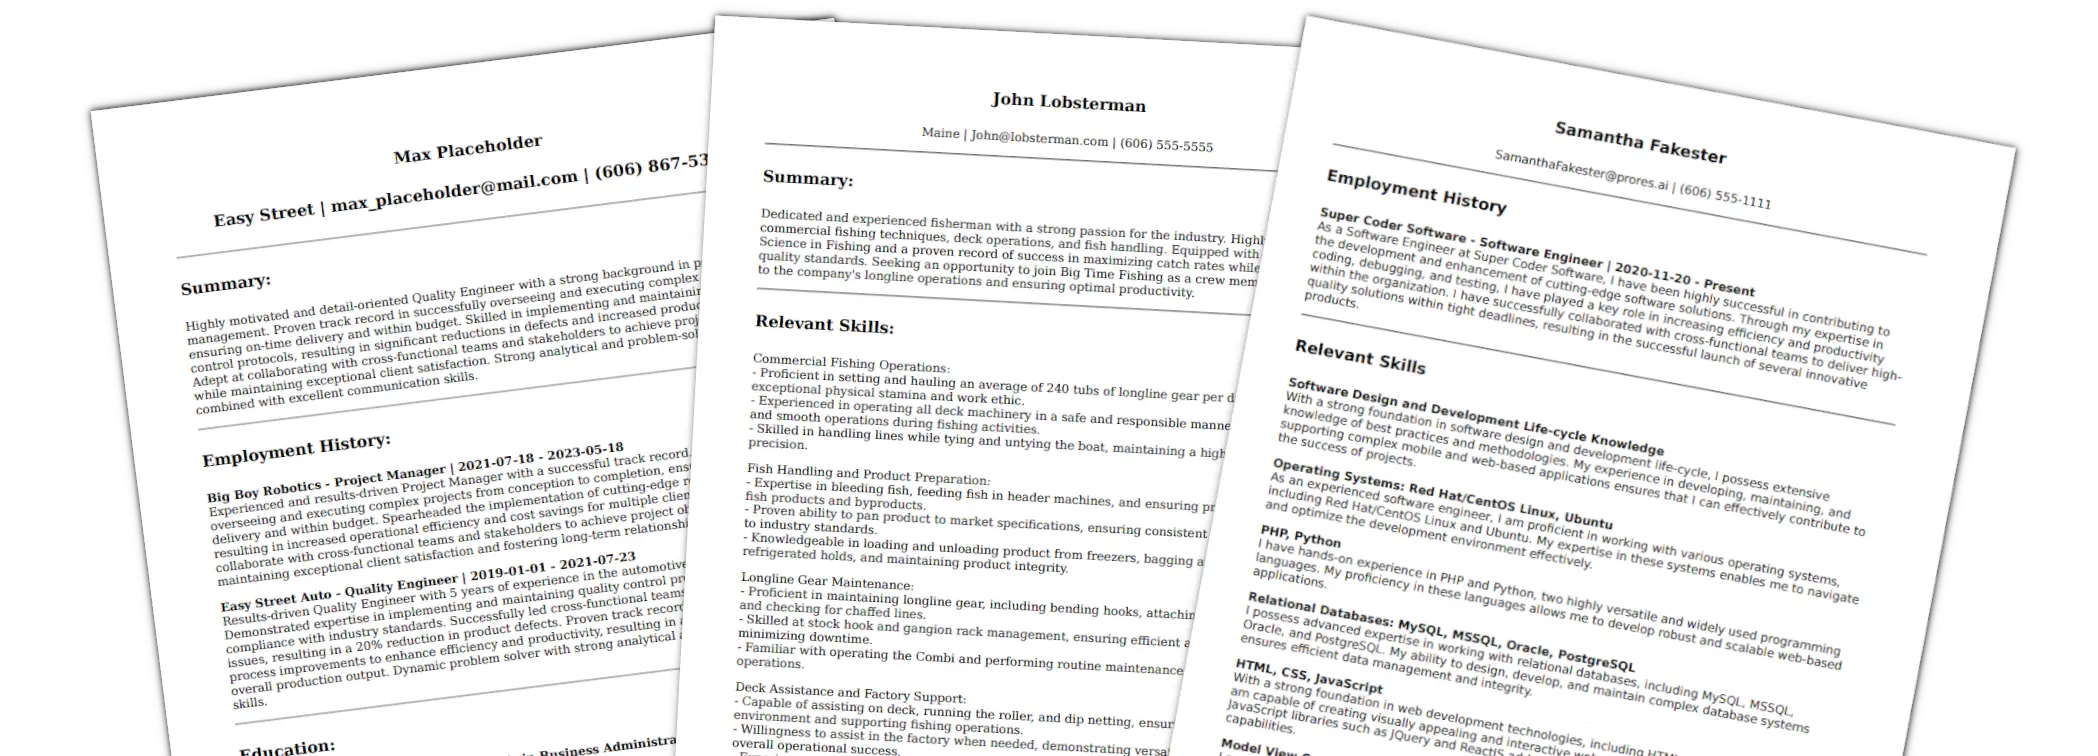 Three Resumes created using ProRes.ai